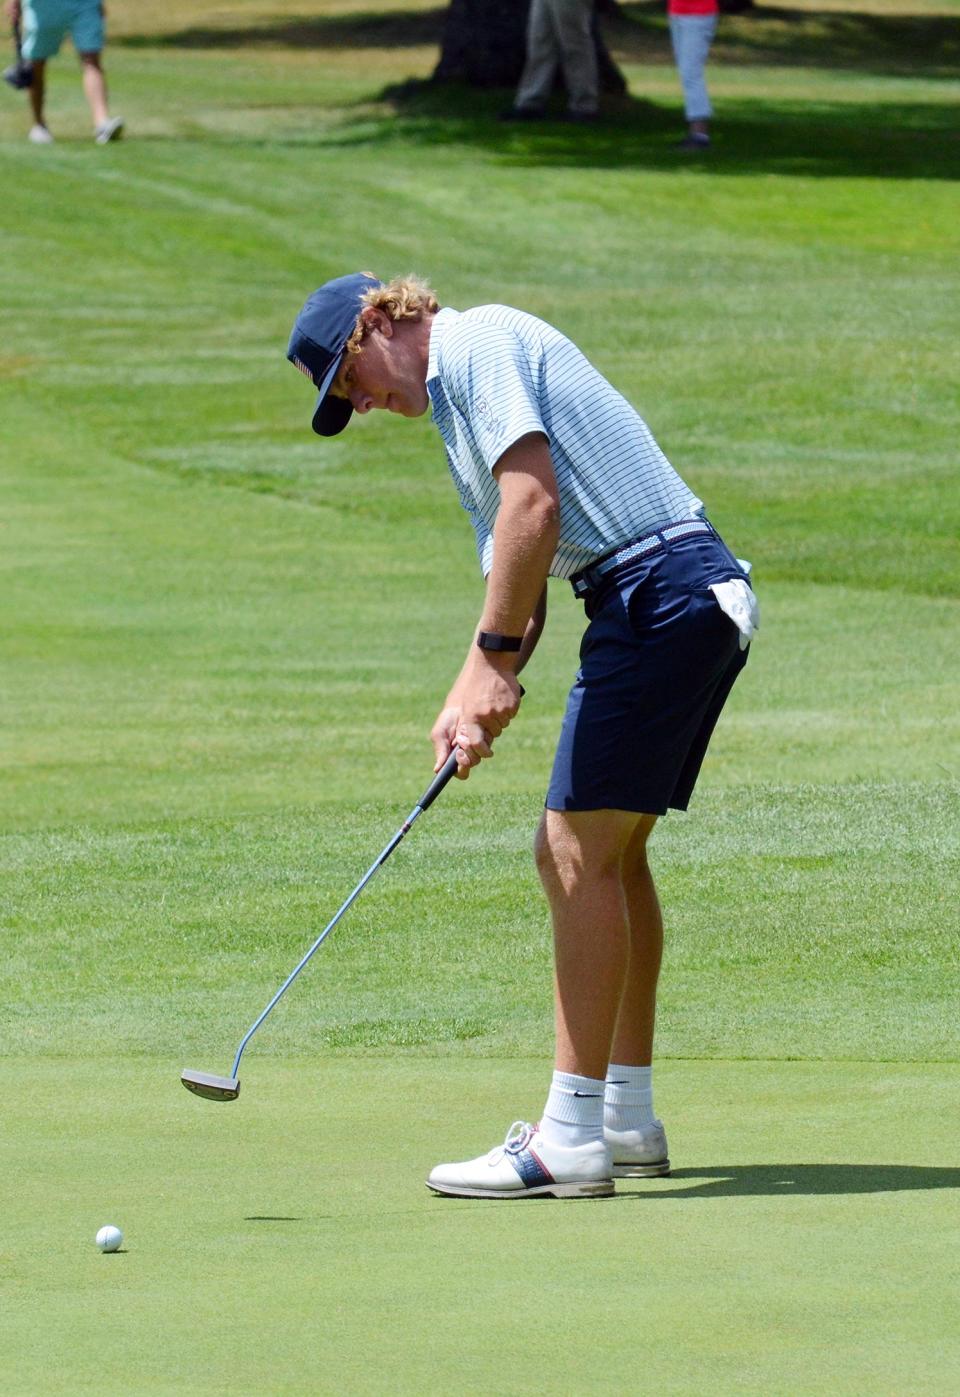 Gavin Newkirk of Batavia, Ill. sends in a put on his final hole of the opening round Tuesday.